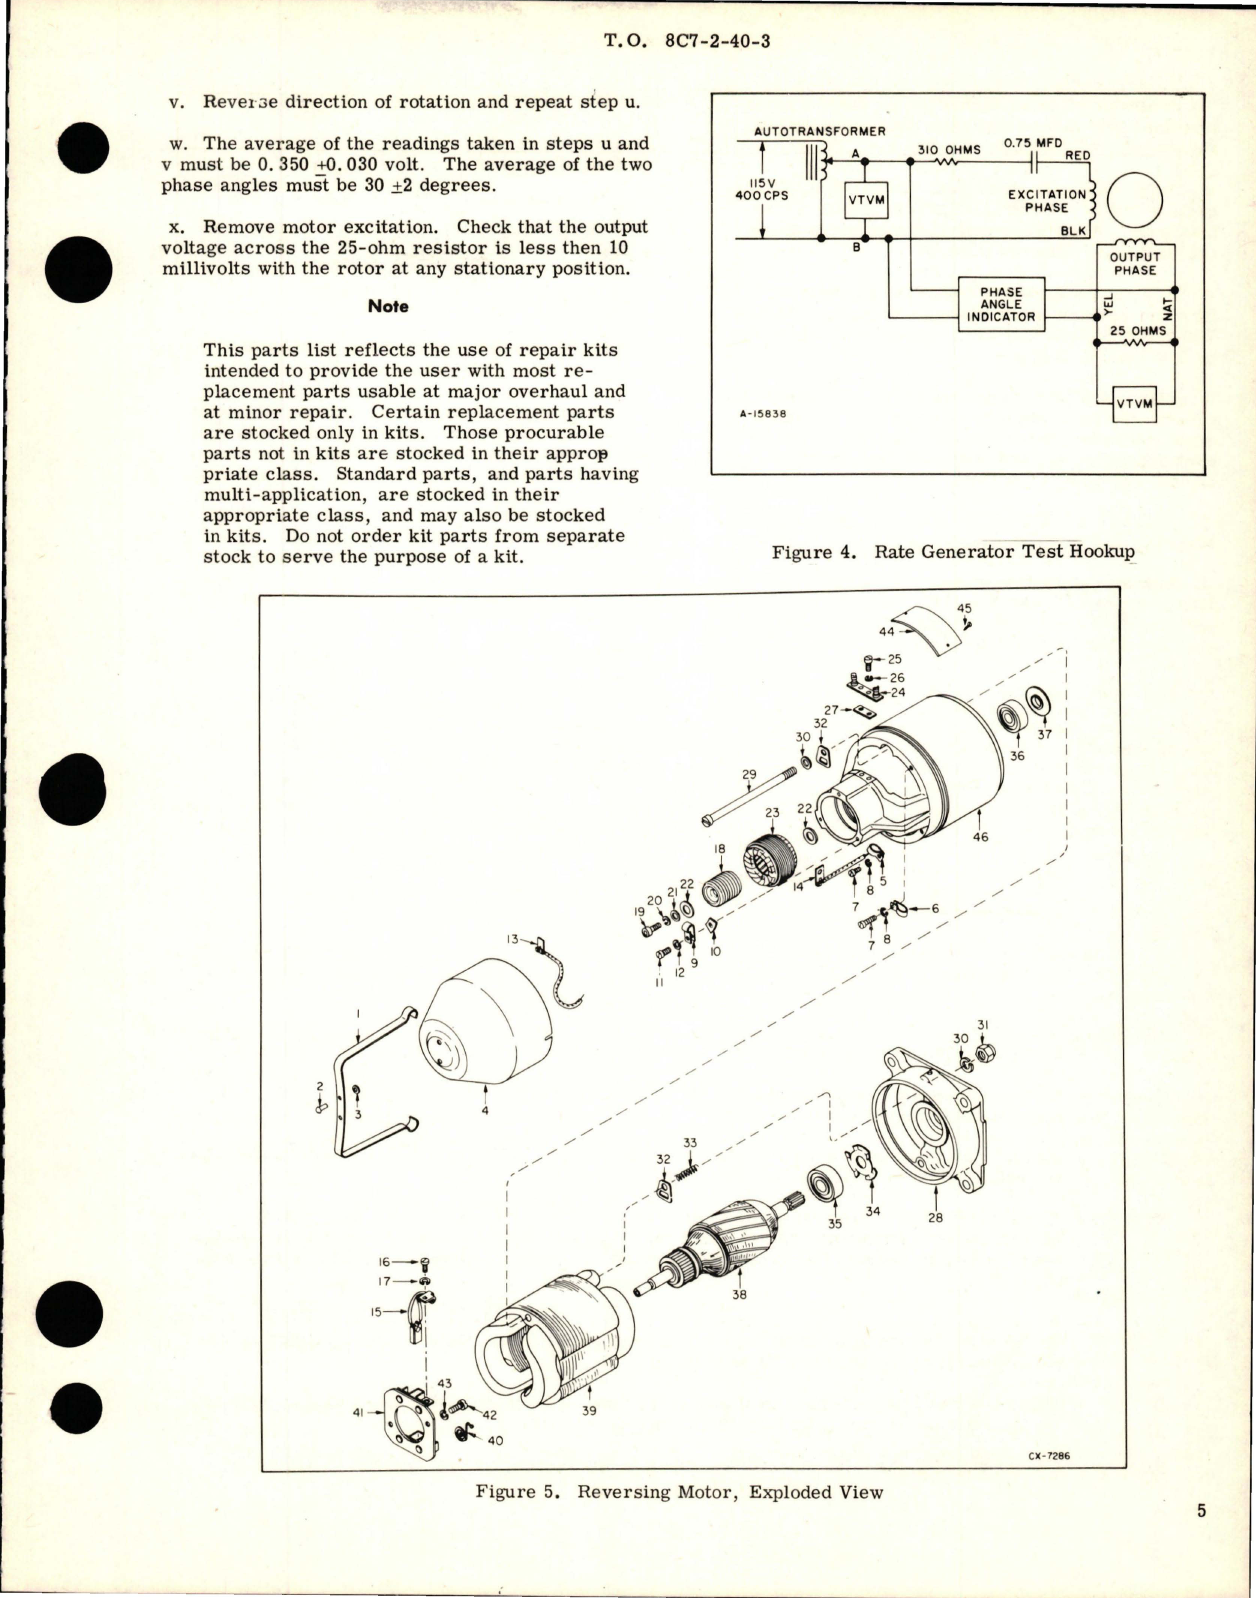 Sample page 5 from AirCorps Library document: Overhaul Instructions with Parts Breakdown for Reversing Motor - Type DK-5 